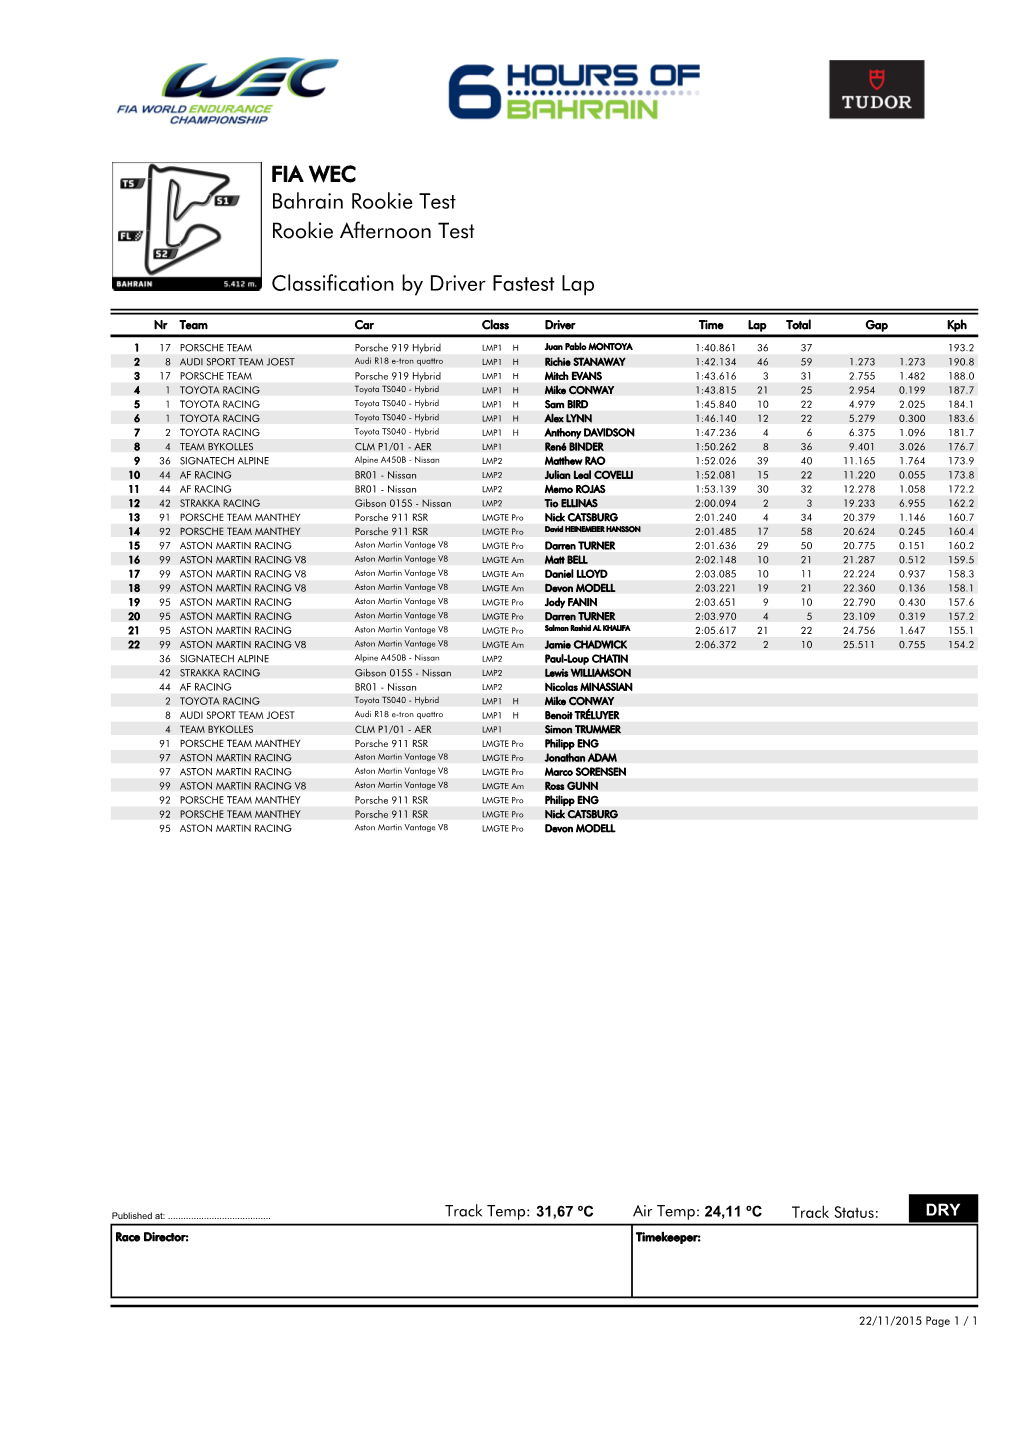 Classification by Driver Fastest Lap Rookie Afternoon Test Bahrain